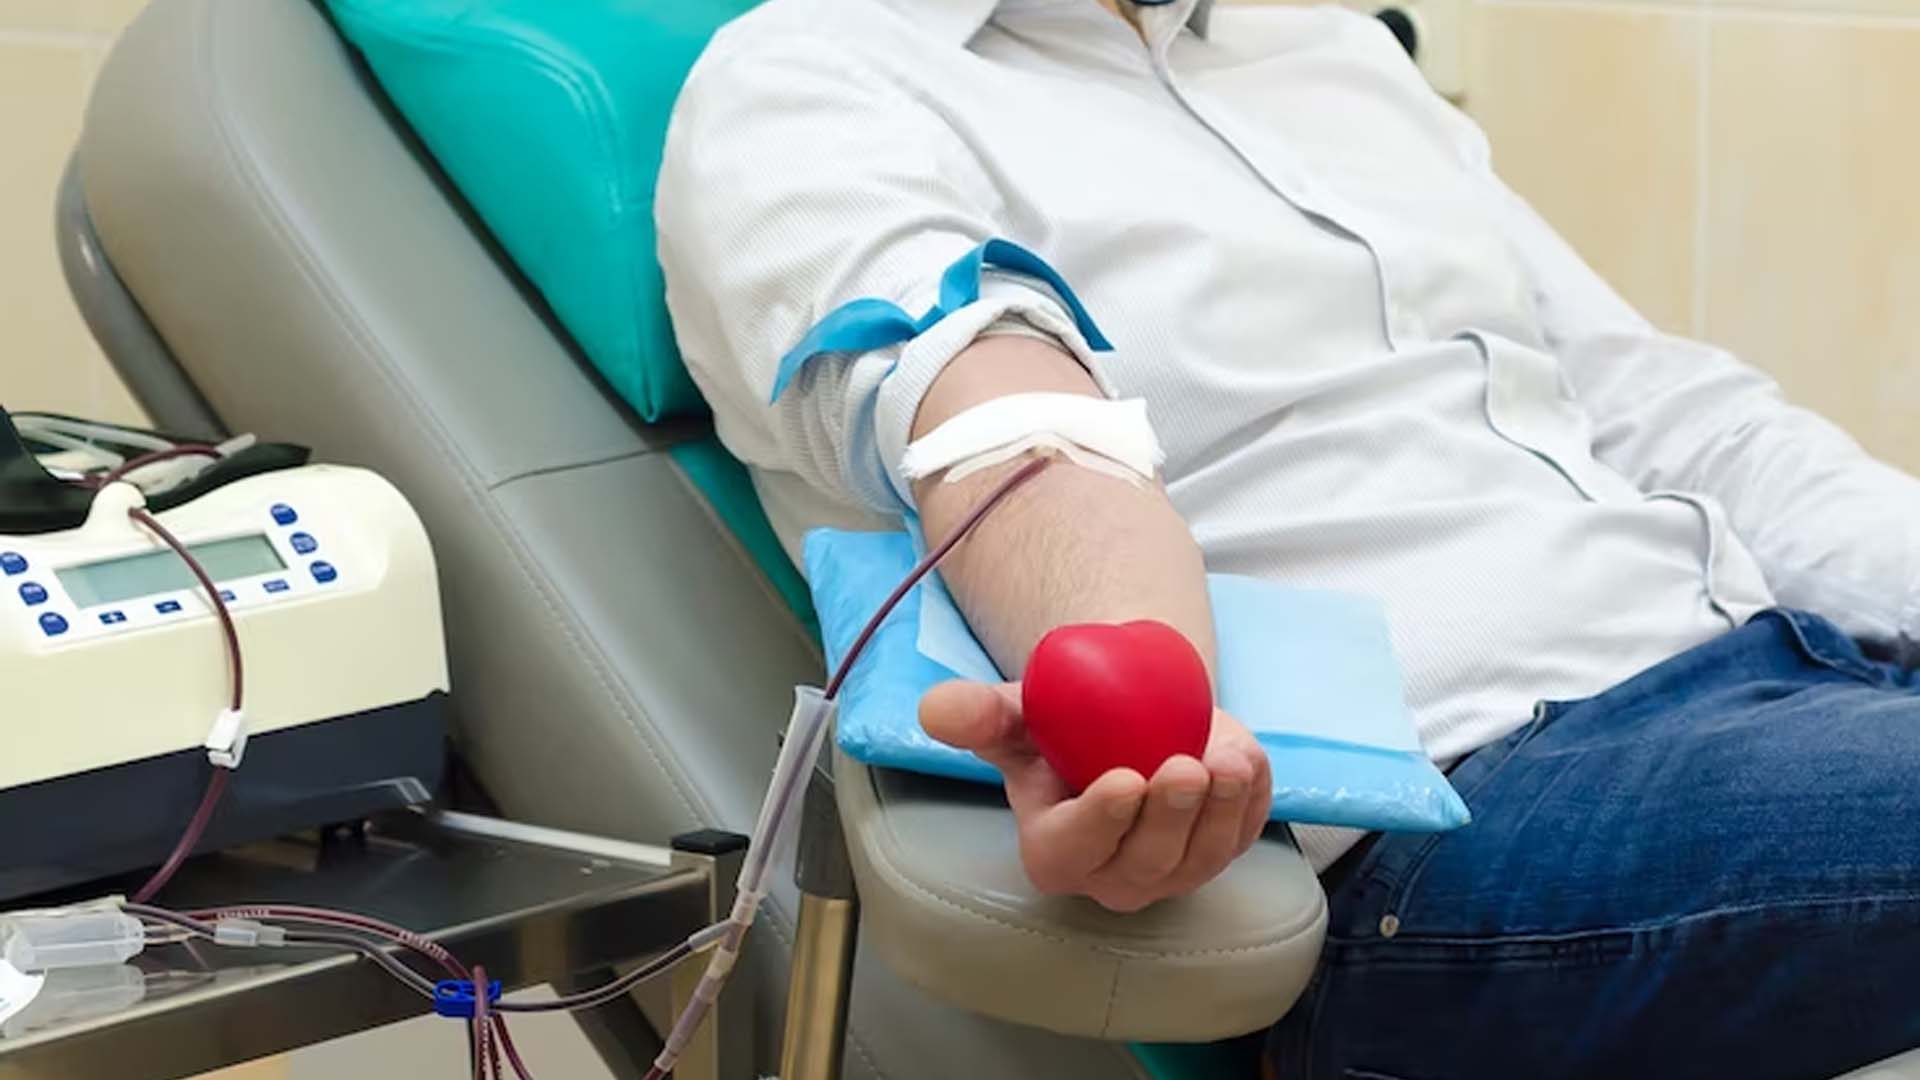 Donating Blood Have Health Benefits